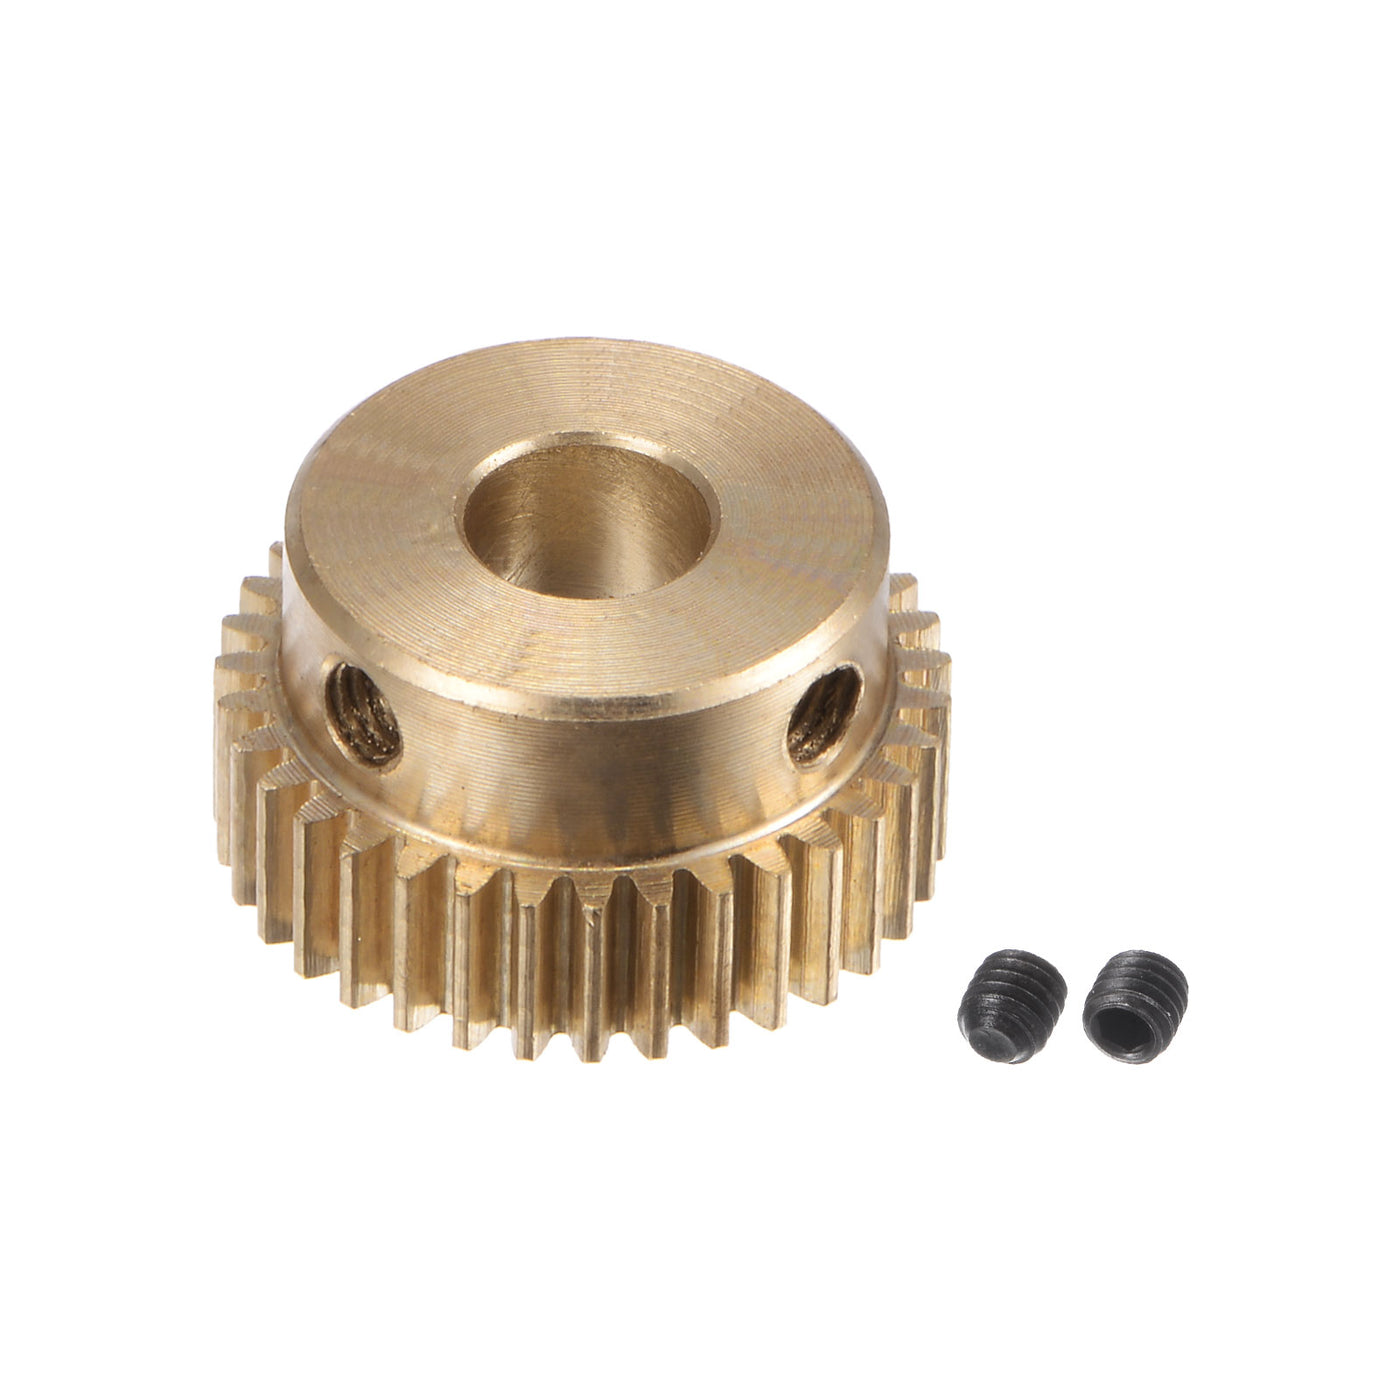 uxcell Uxcell 0.5 Mod 35T 6mm Bore 18mm Outer Dia Brass Motor Rack Pinion Gear with Screws